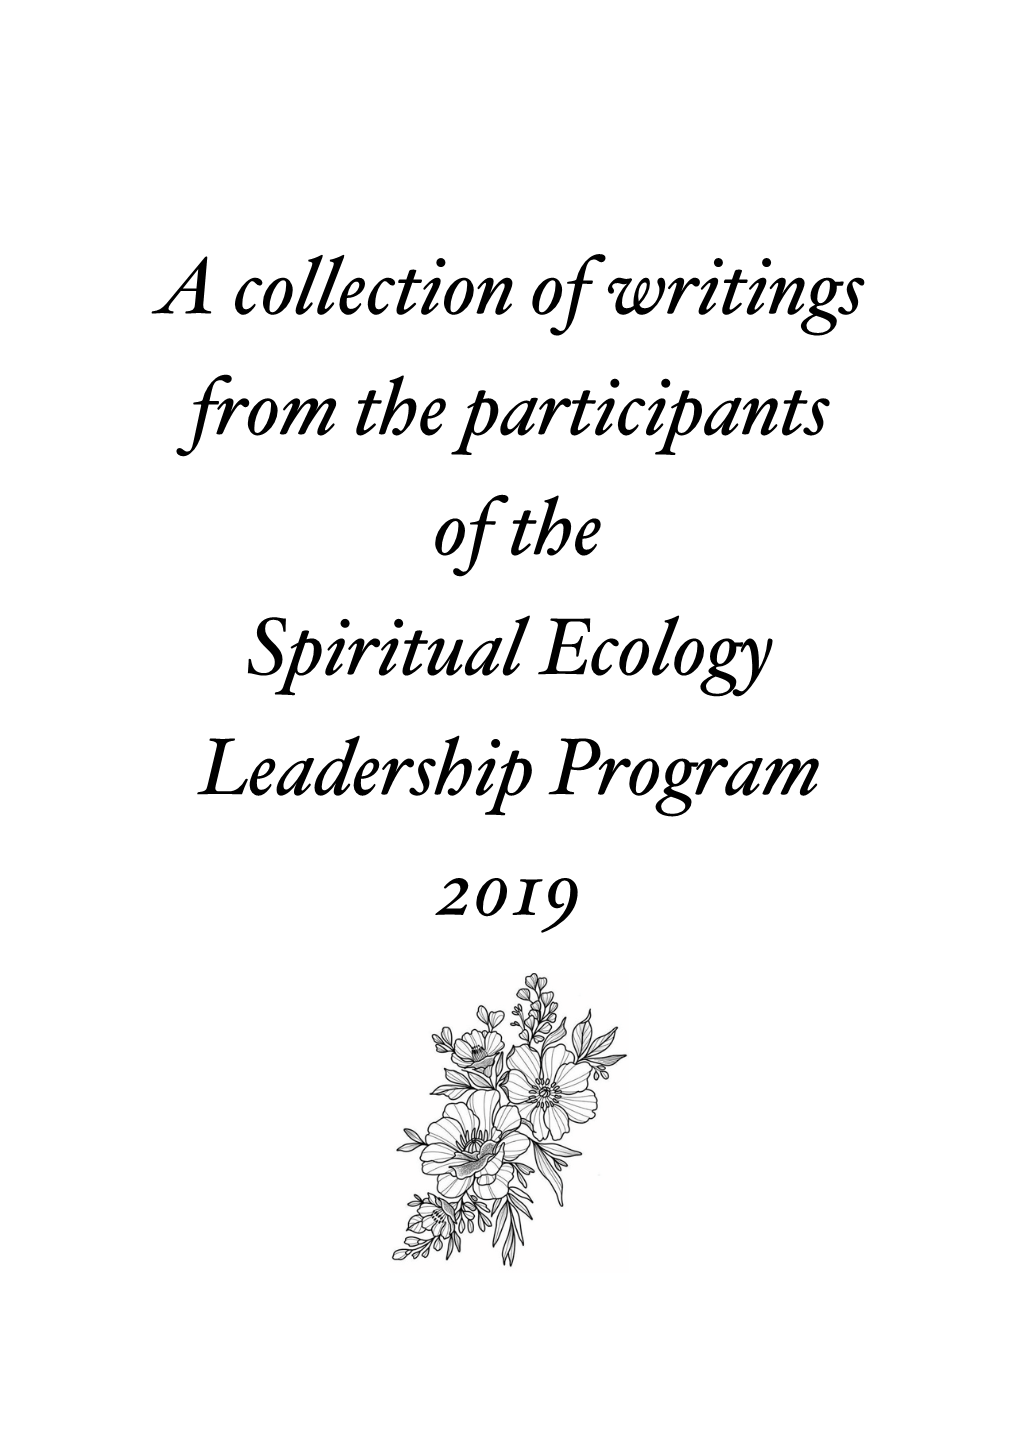 A Collection of Writings from the Participants of the Spiritual Ecology Leadership Program 2019